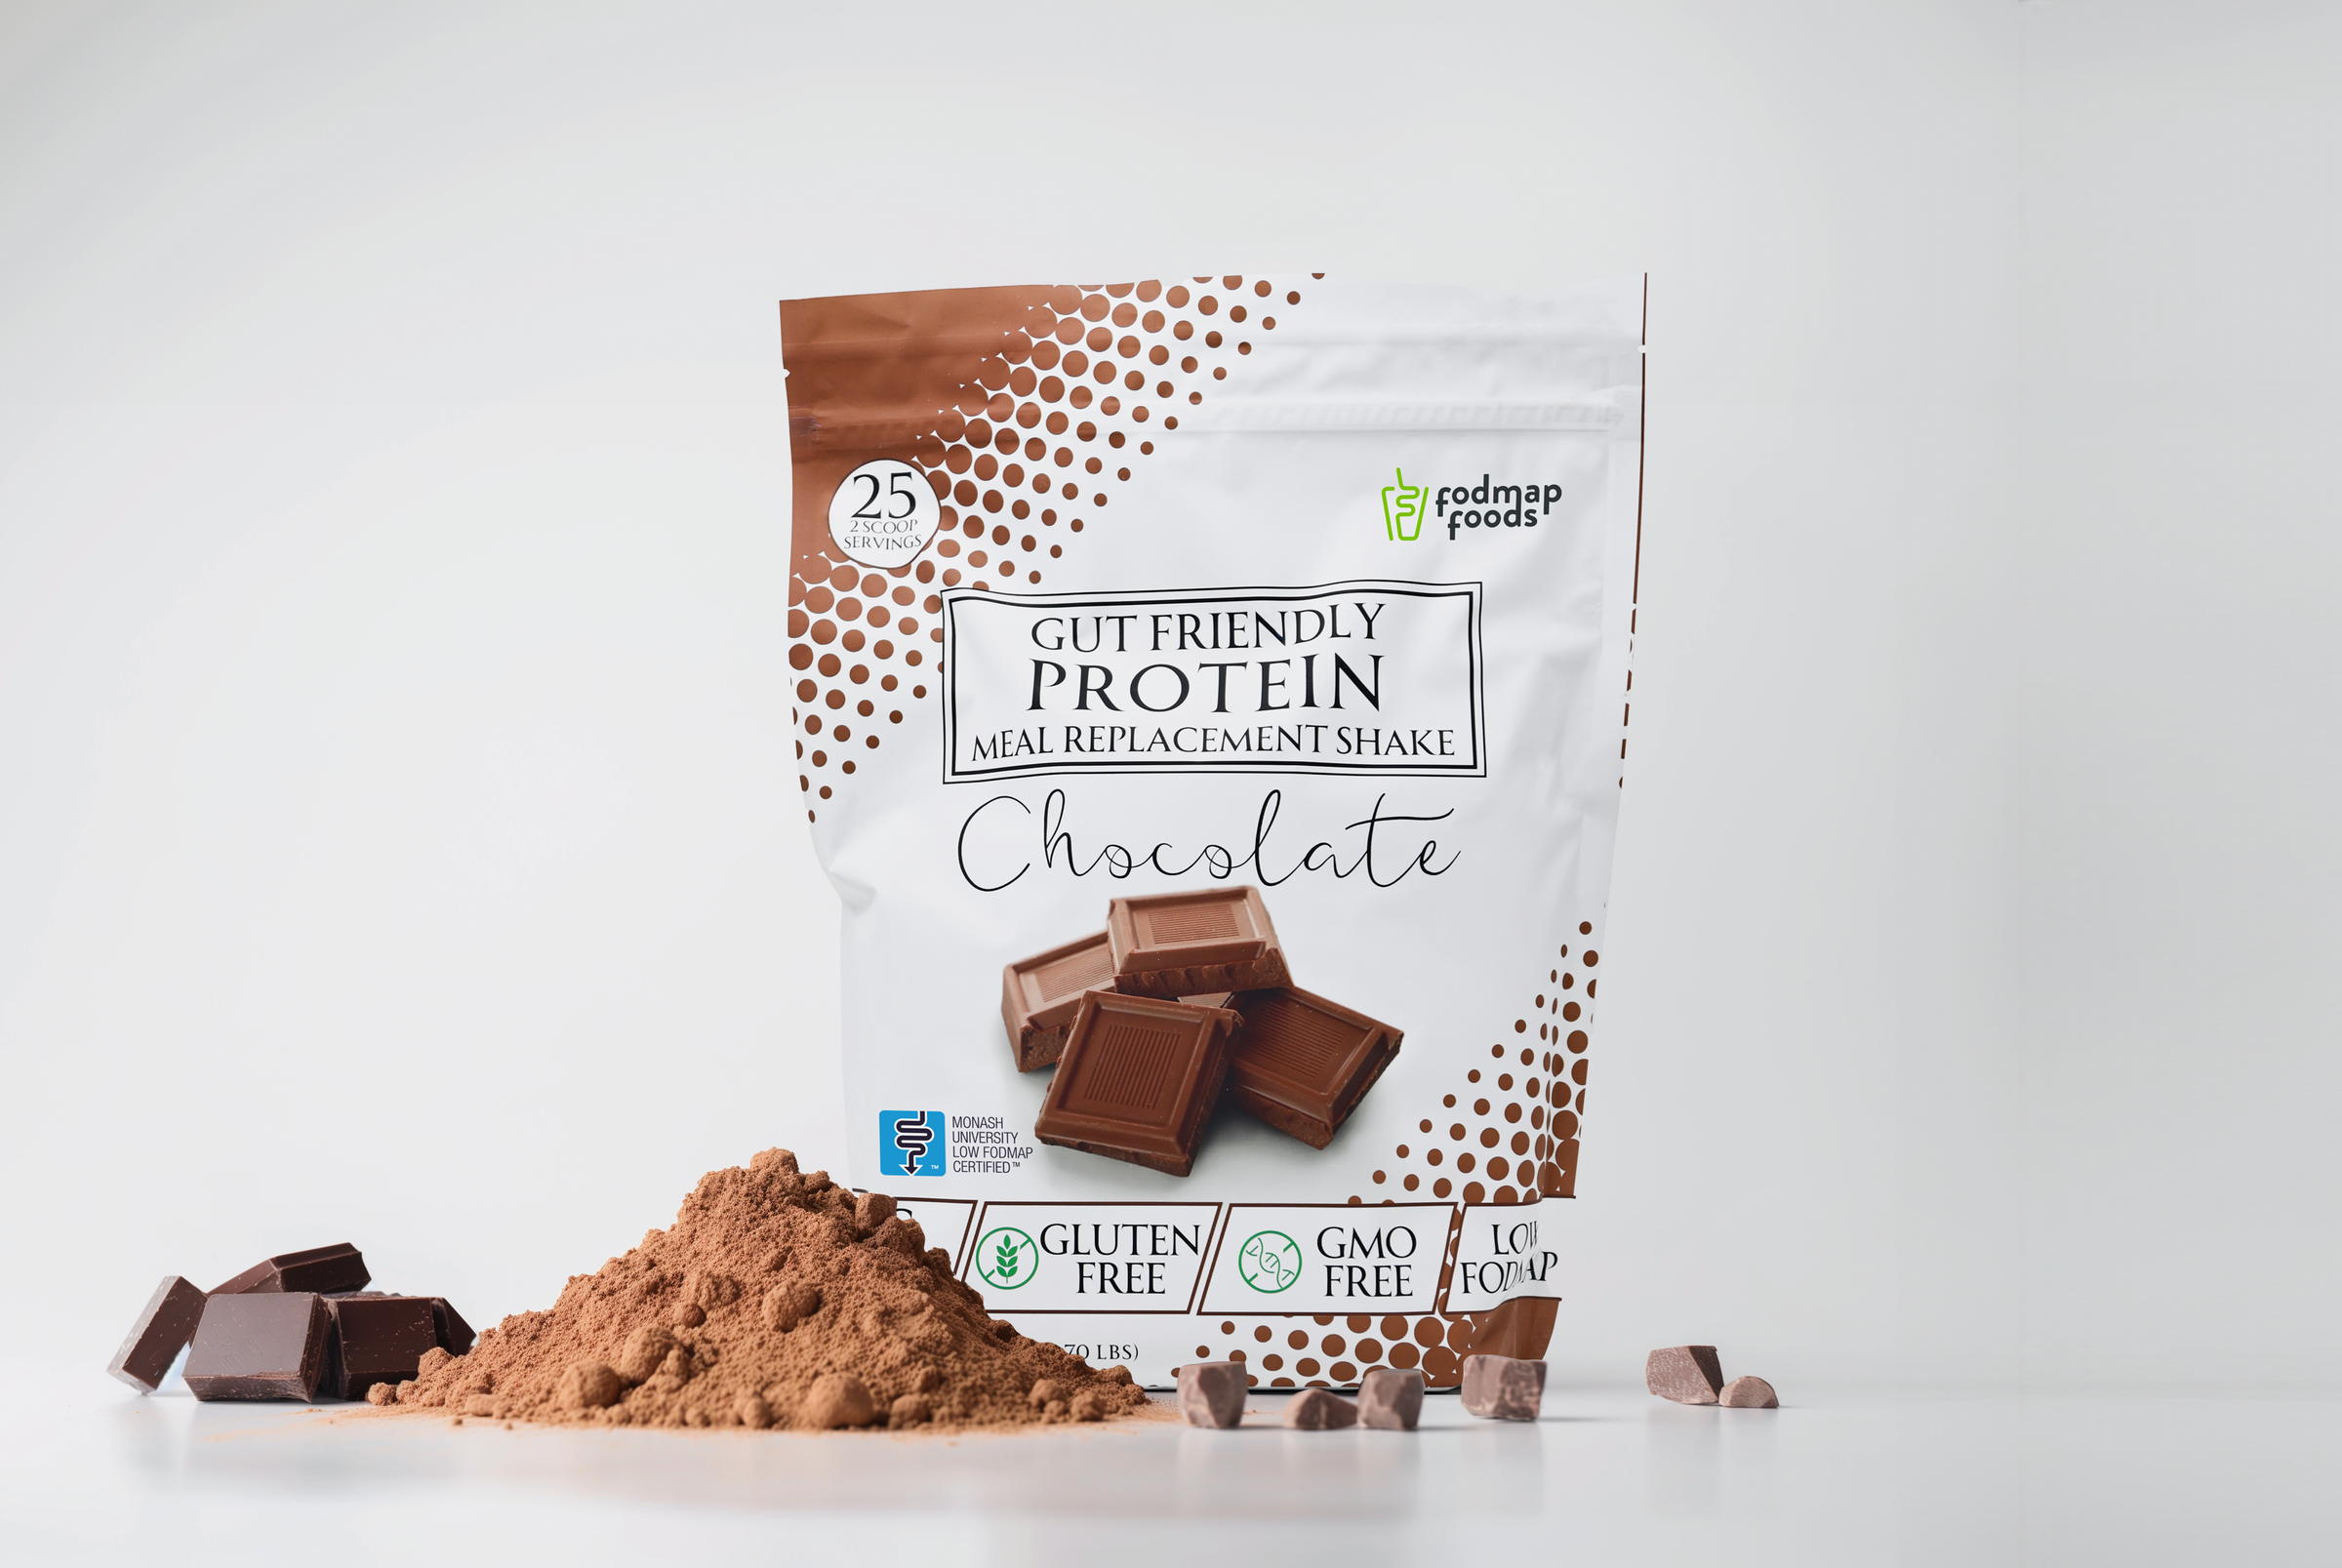 Bag of Chocolate Fodmap Foods protein powder surrounded by chocolate and powder